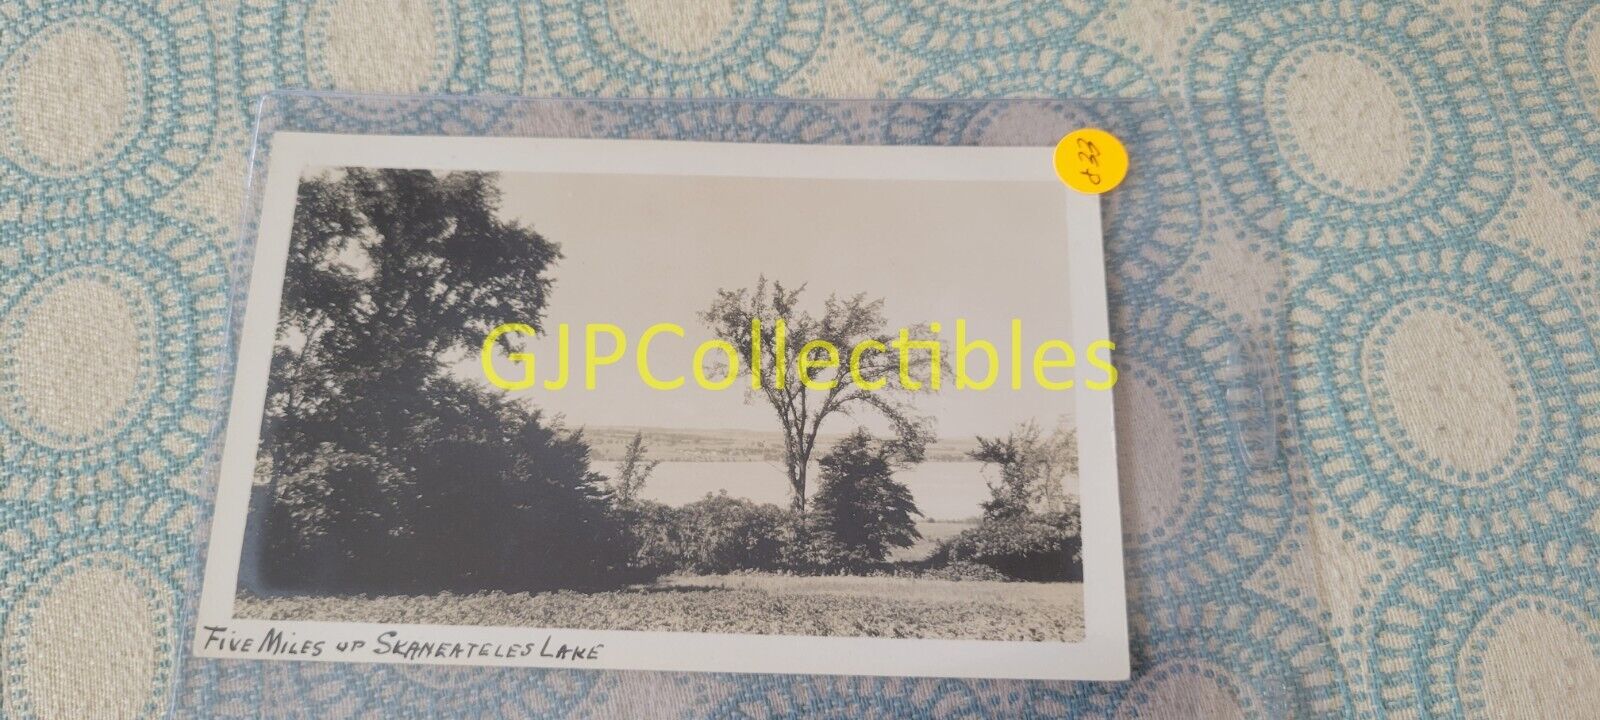 EEP VINTAGE PHOTOGRAPH Spencer Lionel Adams SKANEATELES NY FIVE MILES OF LAKE